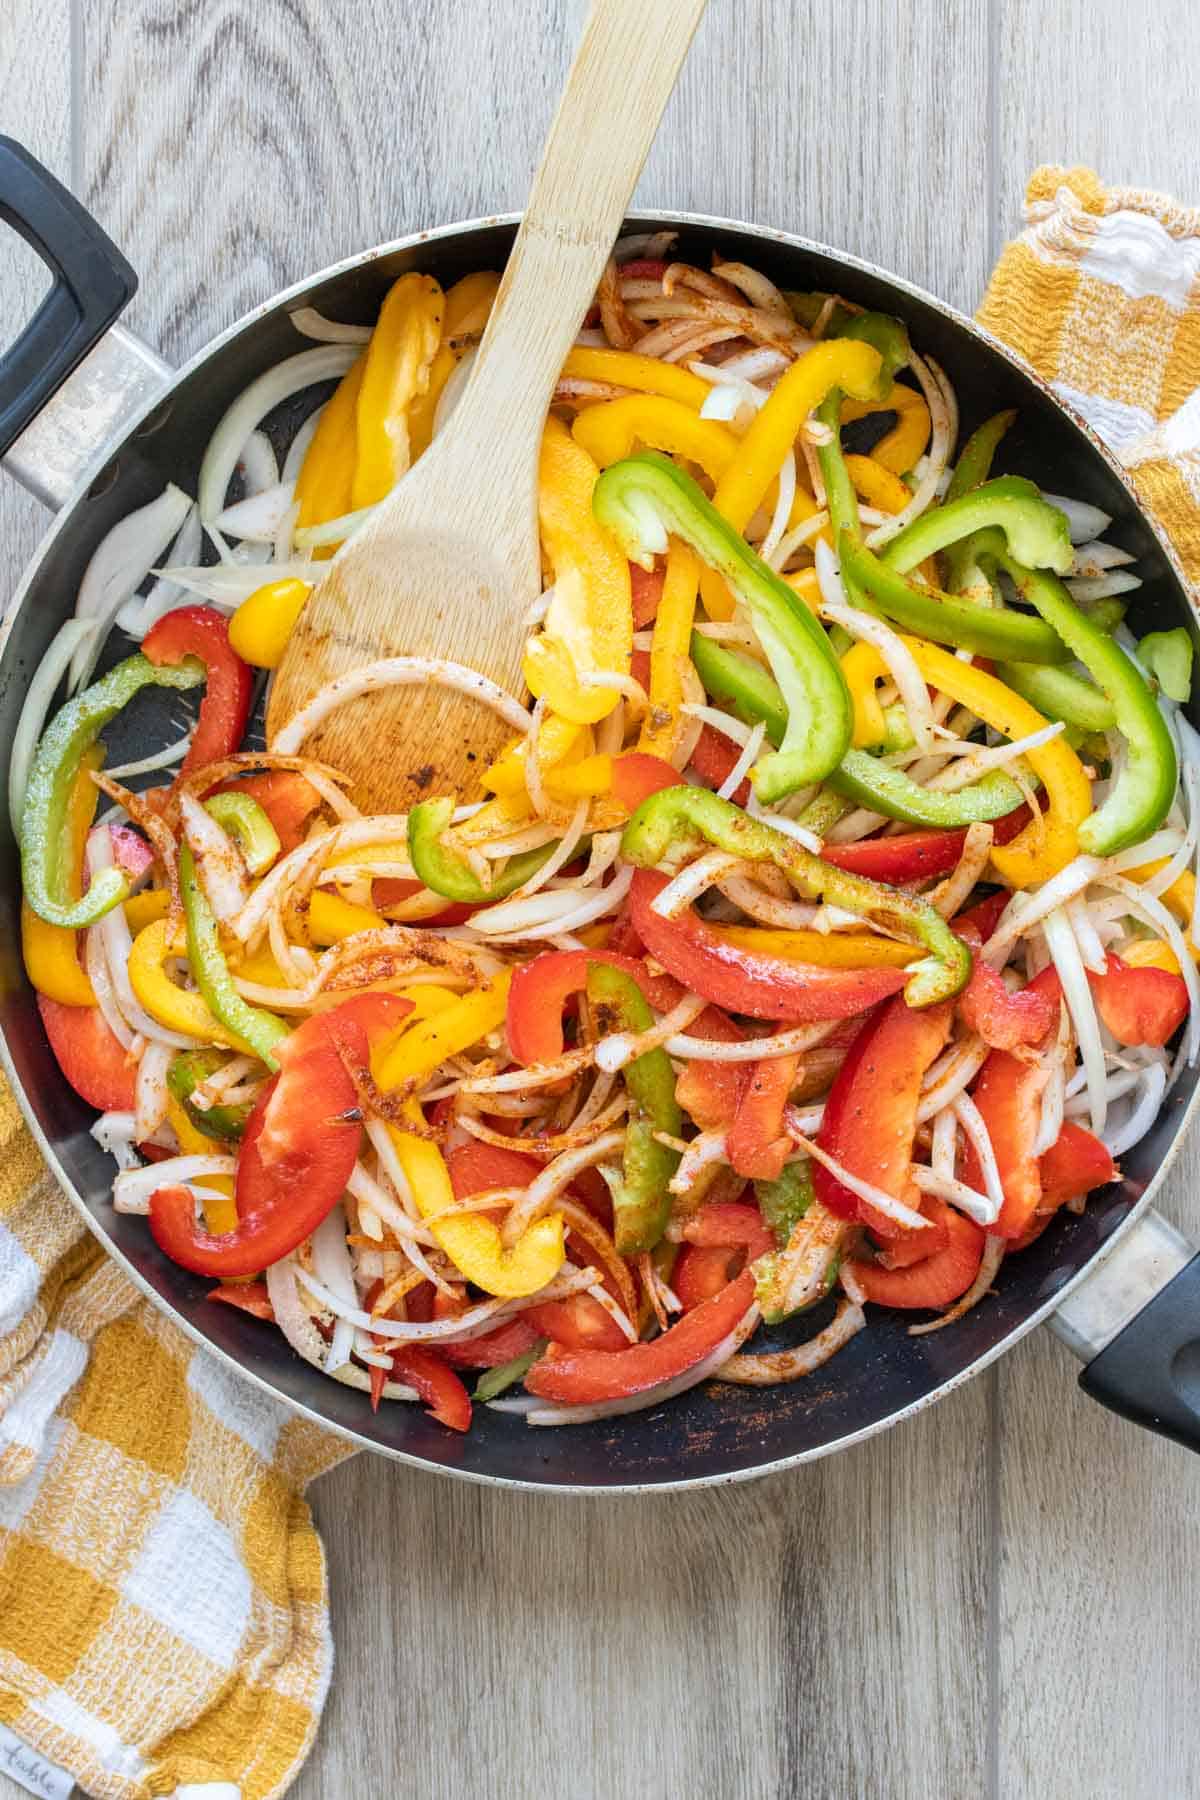 Pan with sliced peppers and onions being mixed with a wooden spoon